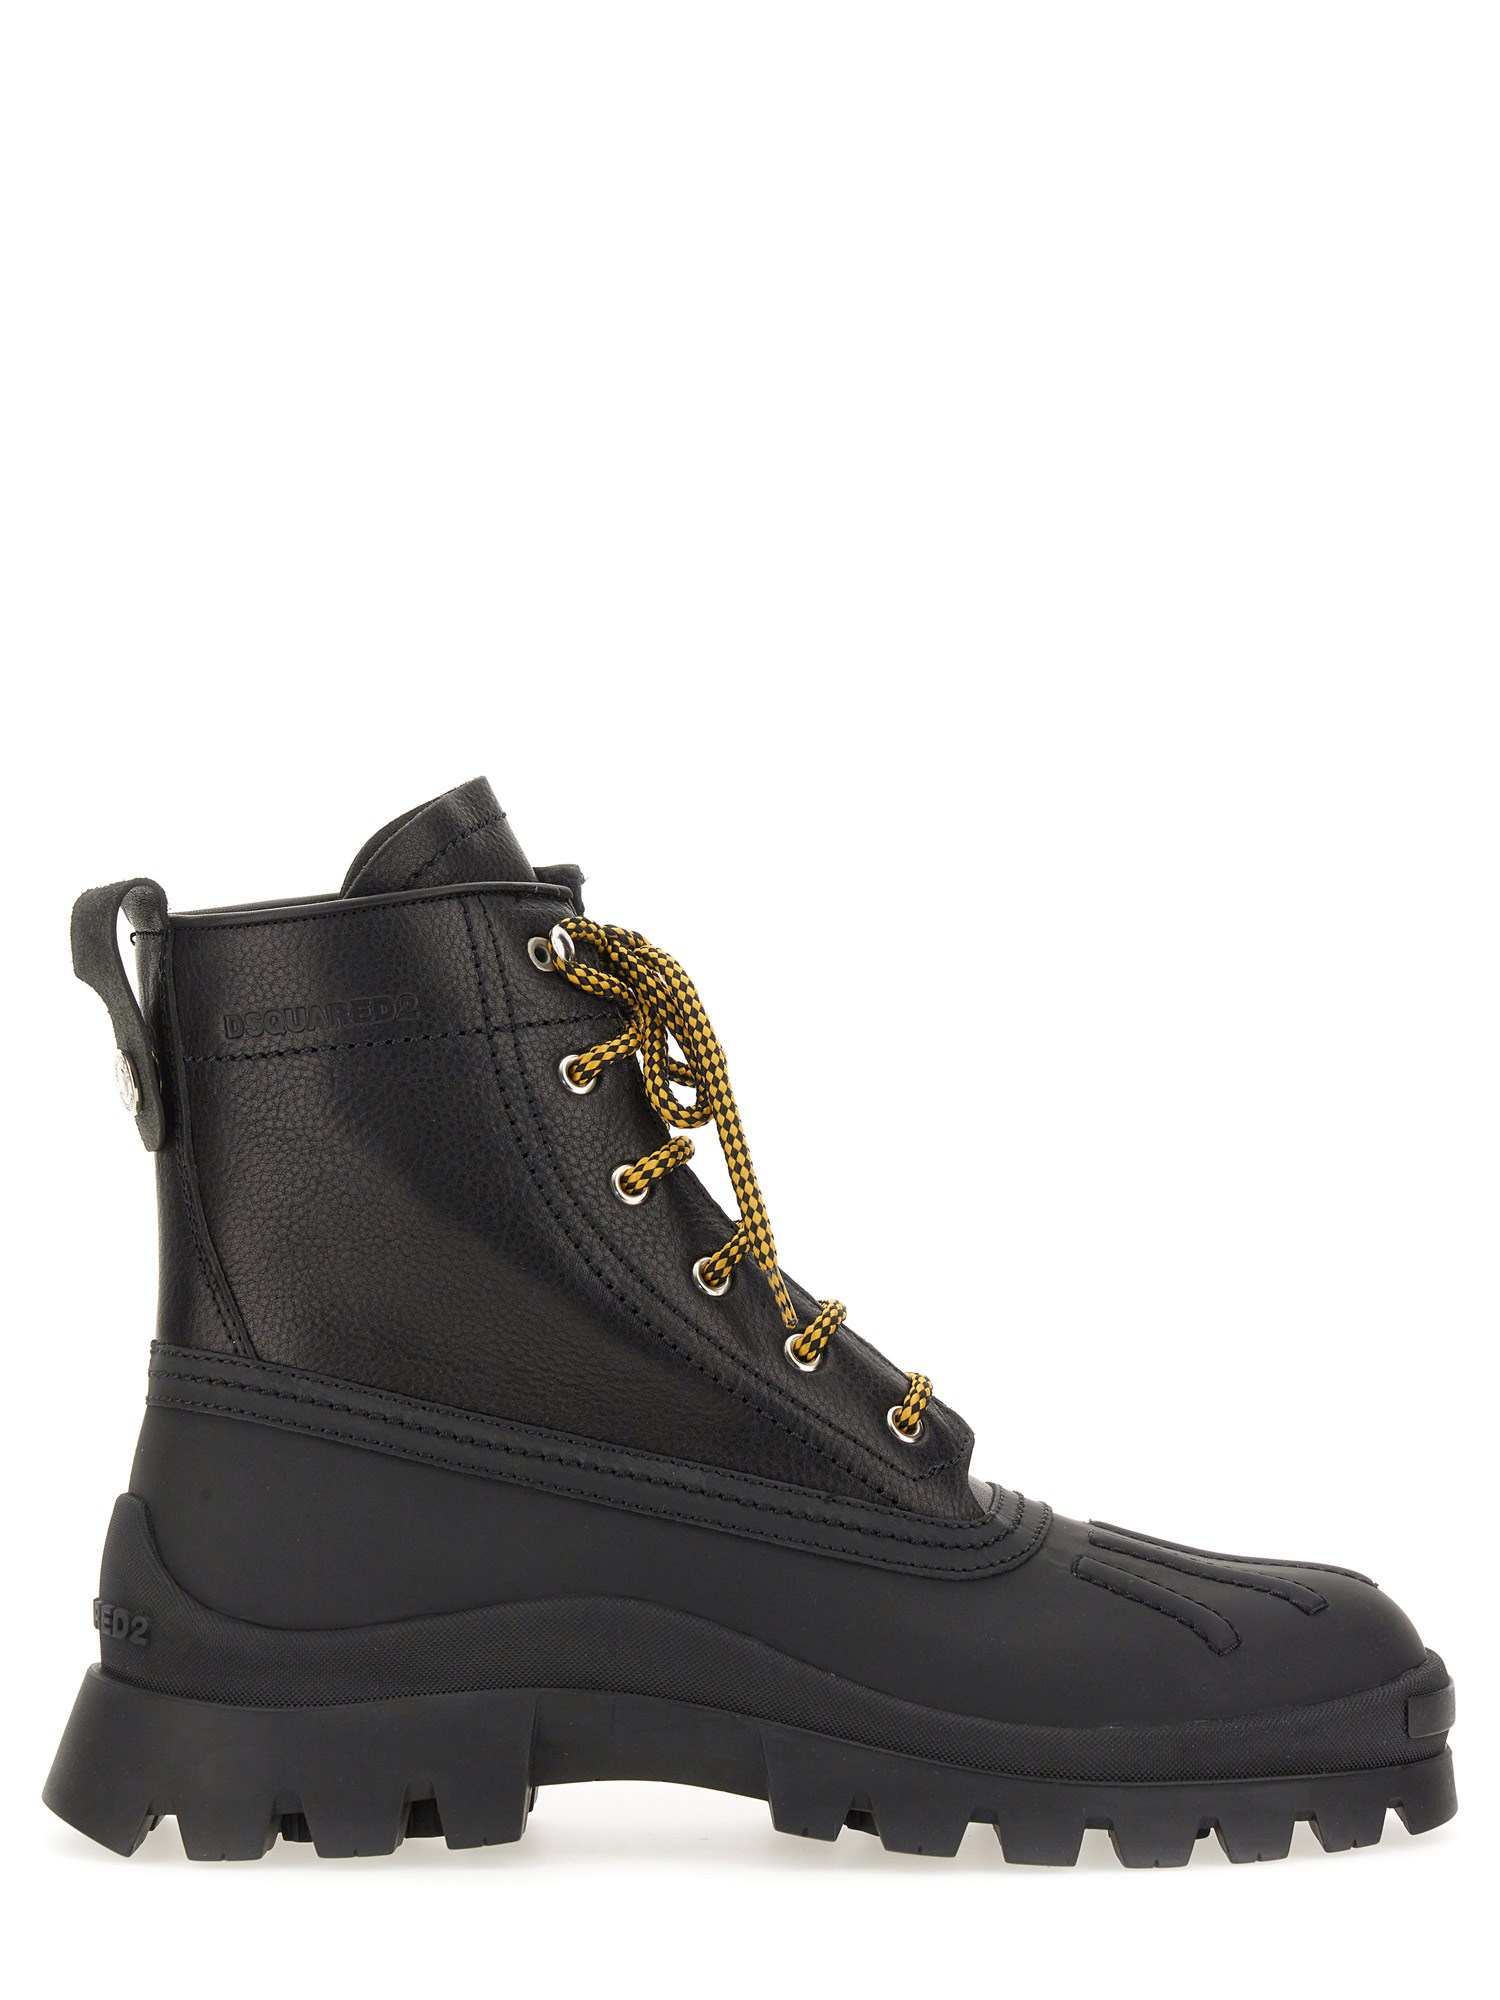 dsquared dsquared boot canadian